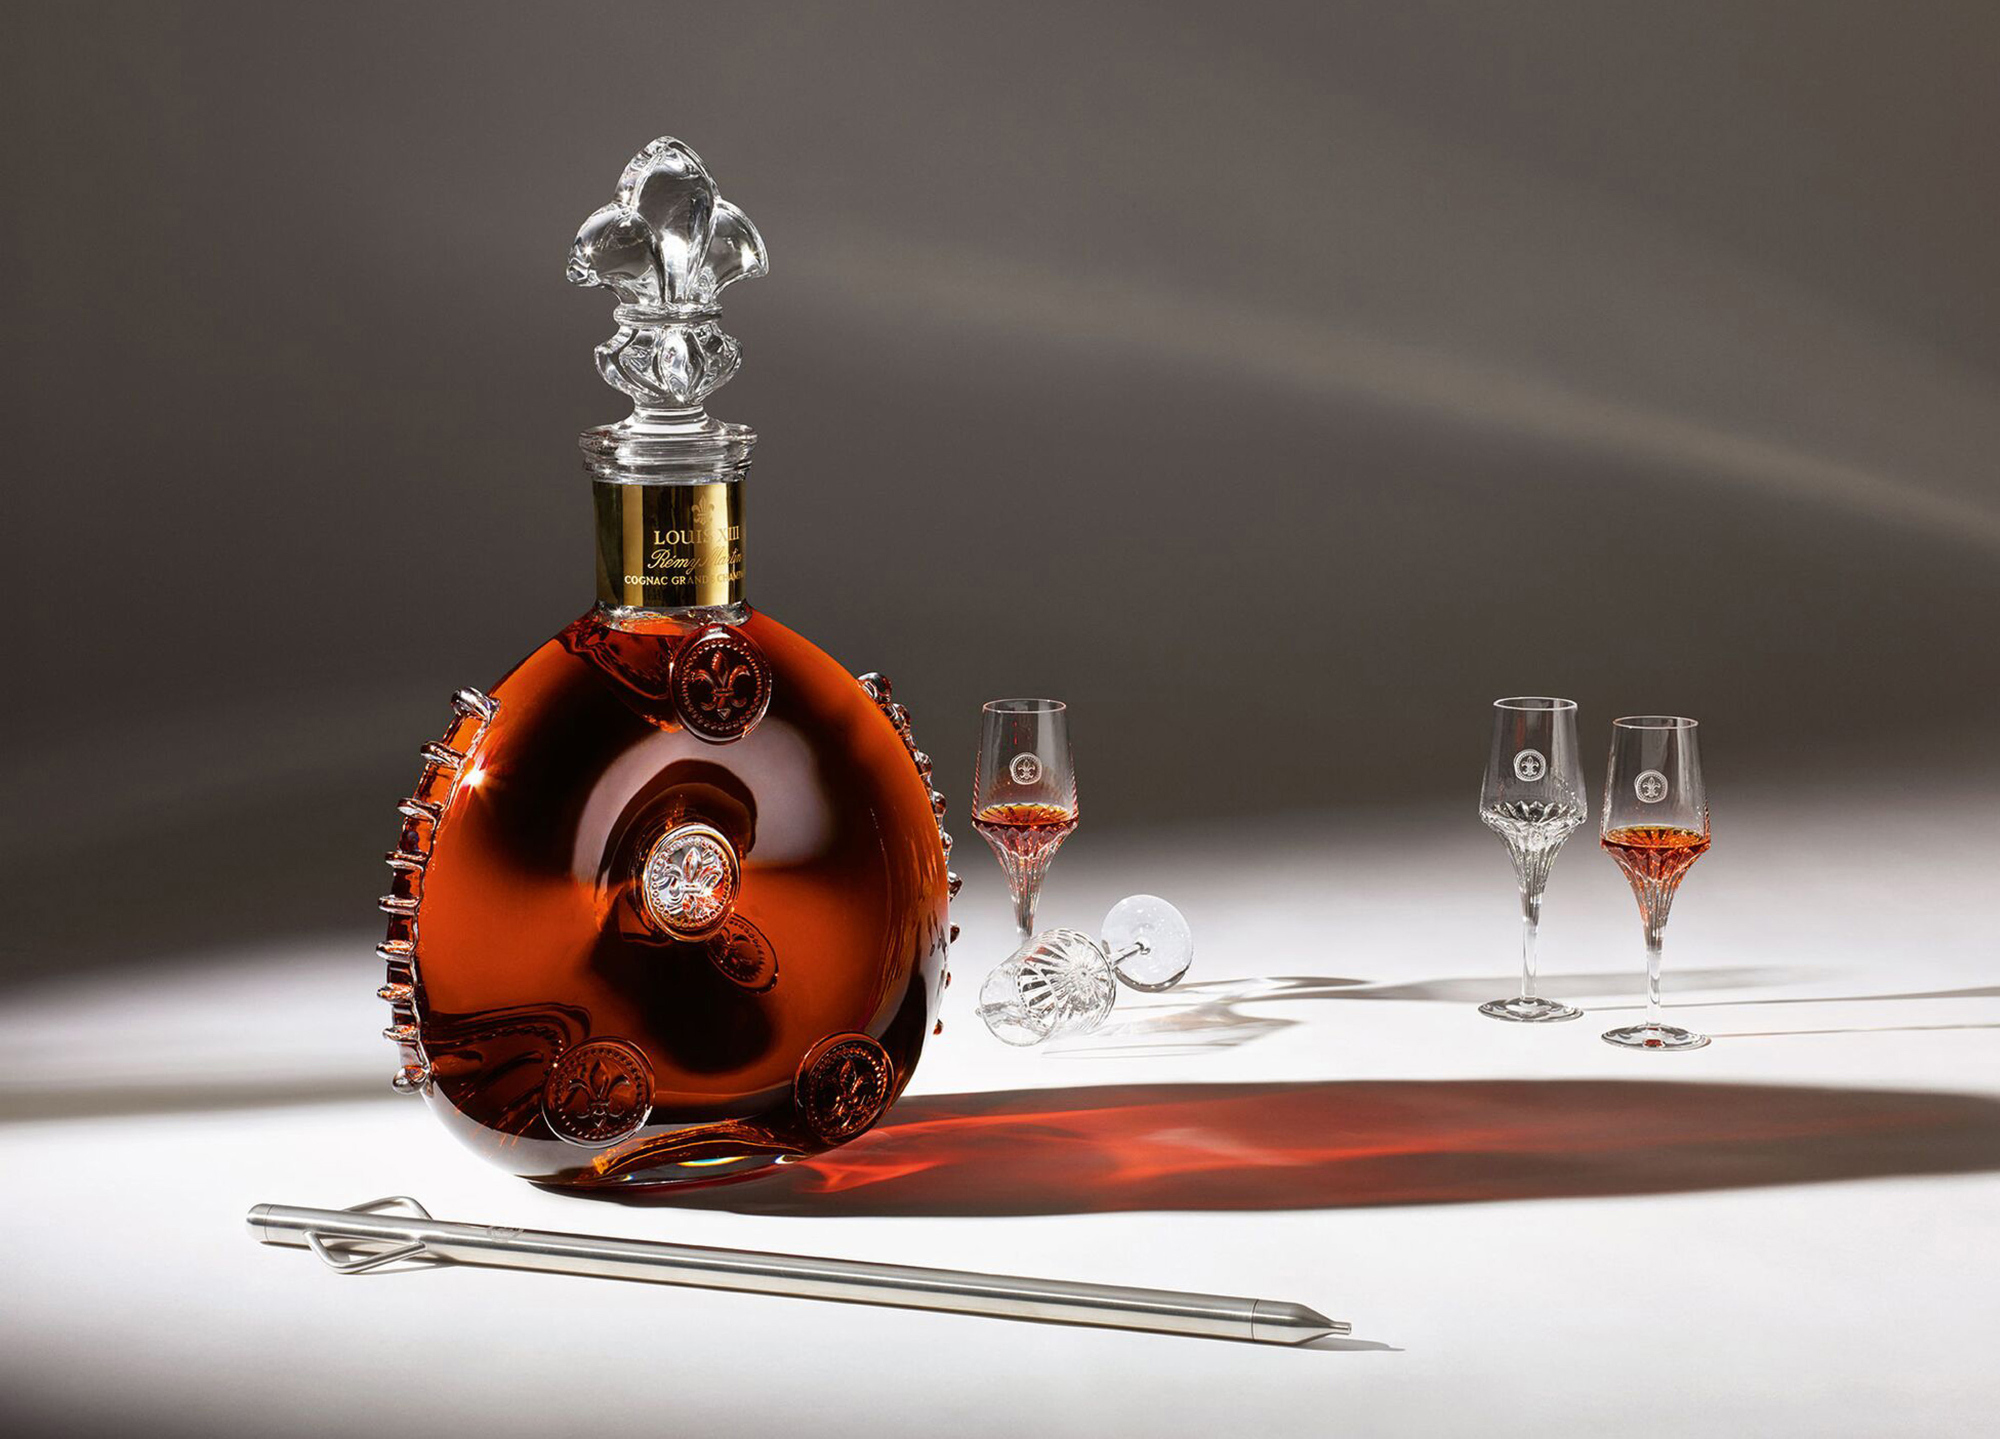 Rare 80-year-old bottle of Remy Martin Louis XIII cognac, worth